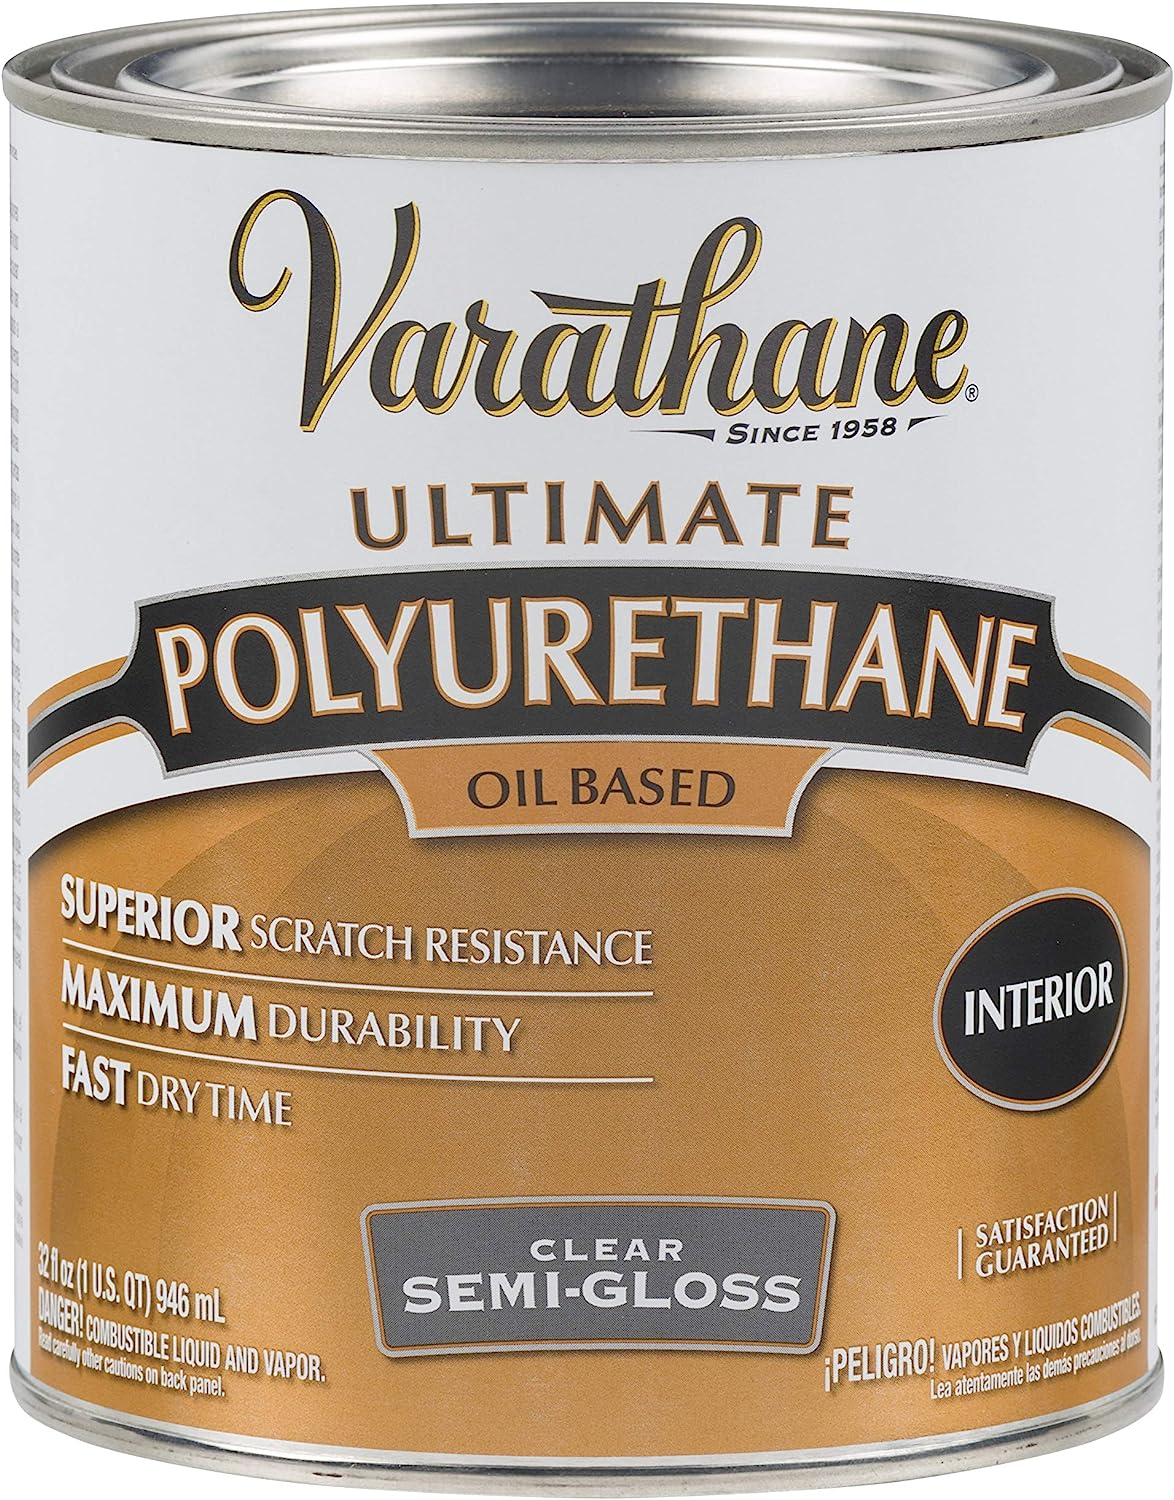 oil based polyurethane product review